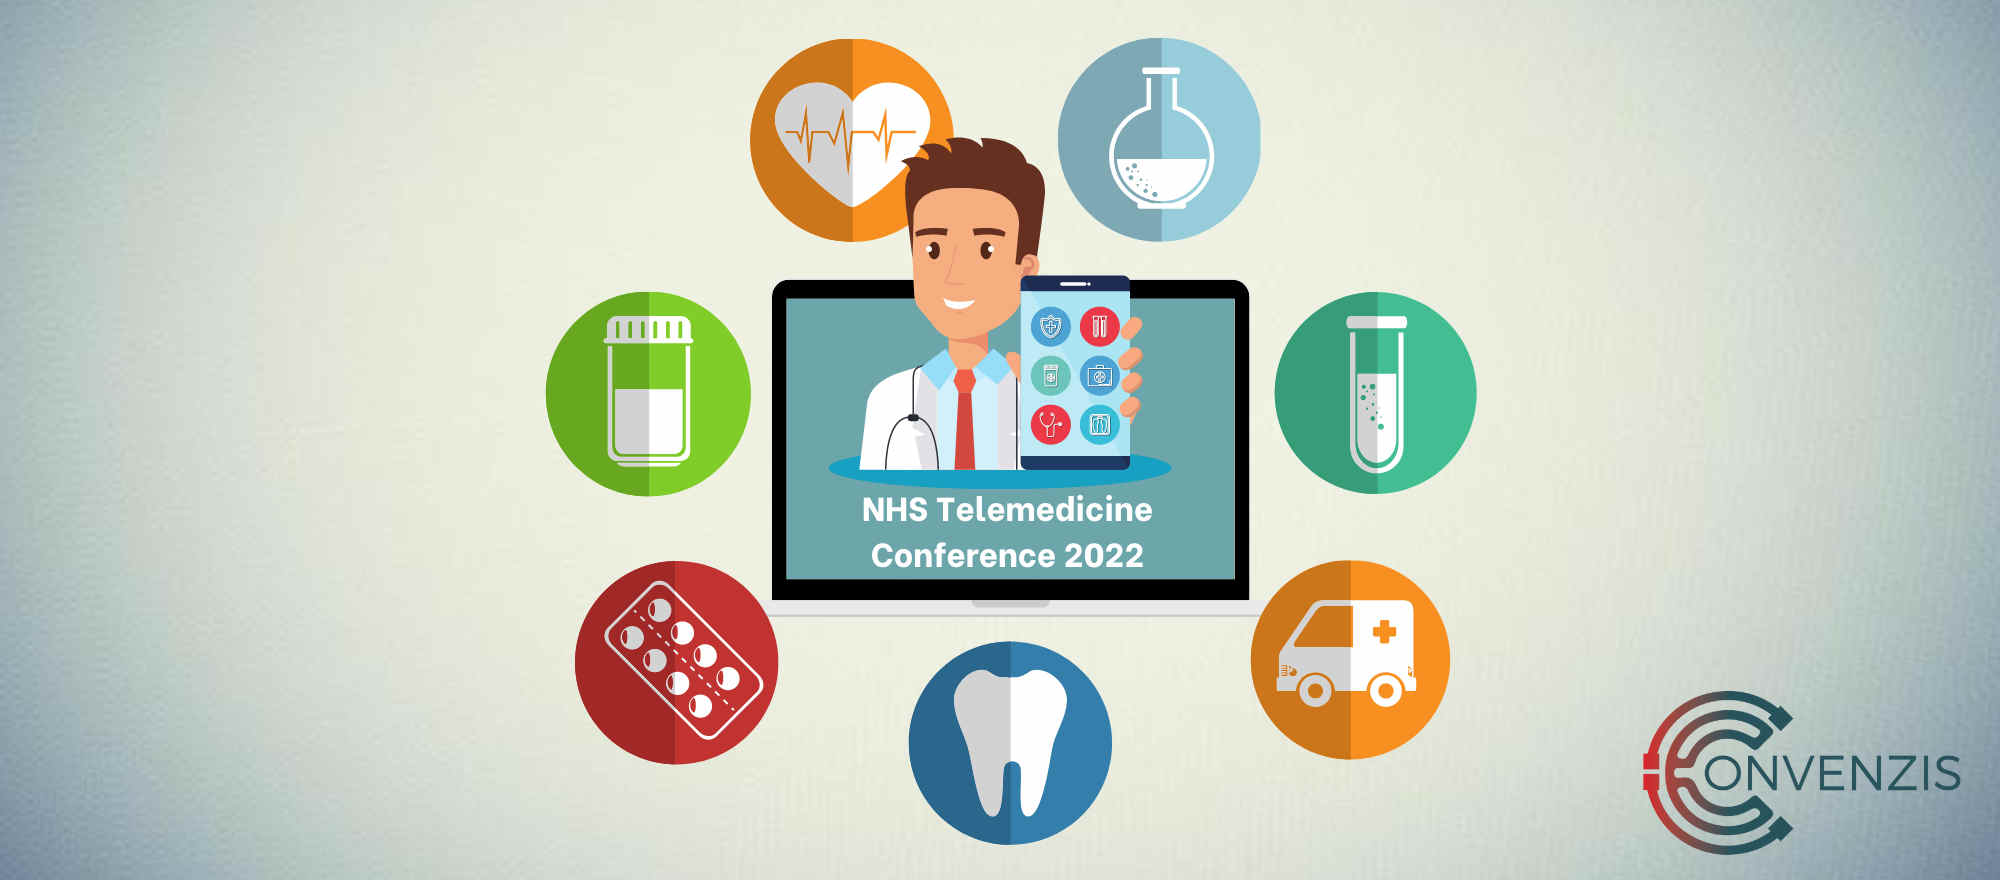 The NHS Telemedicine Conference 2022